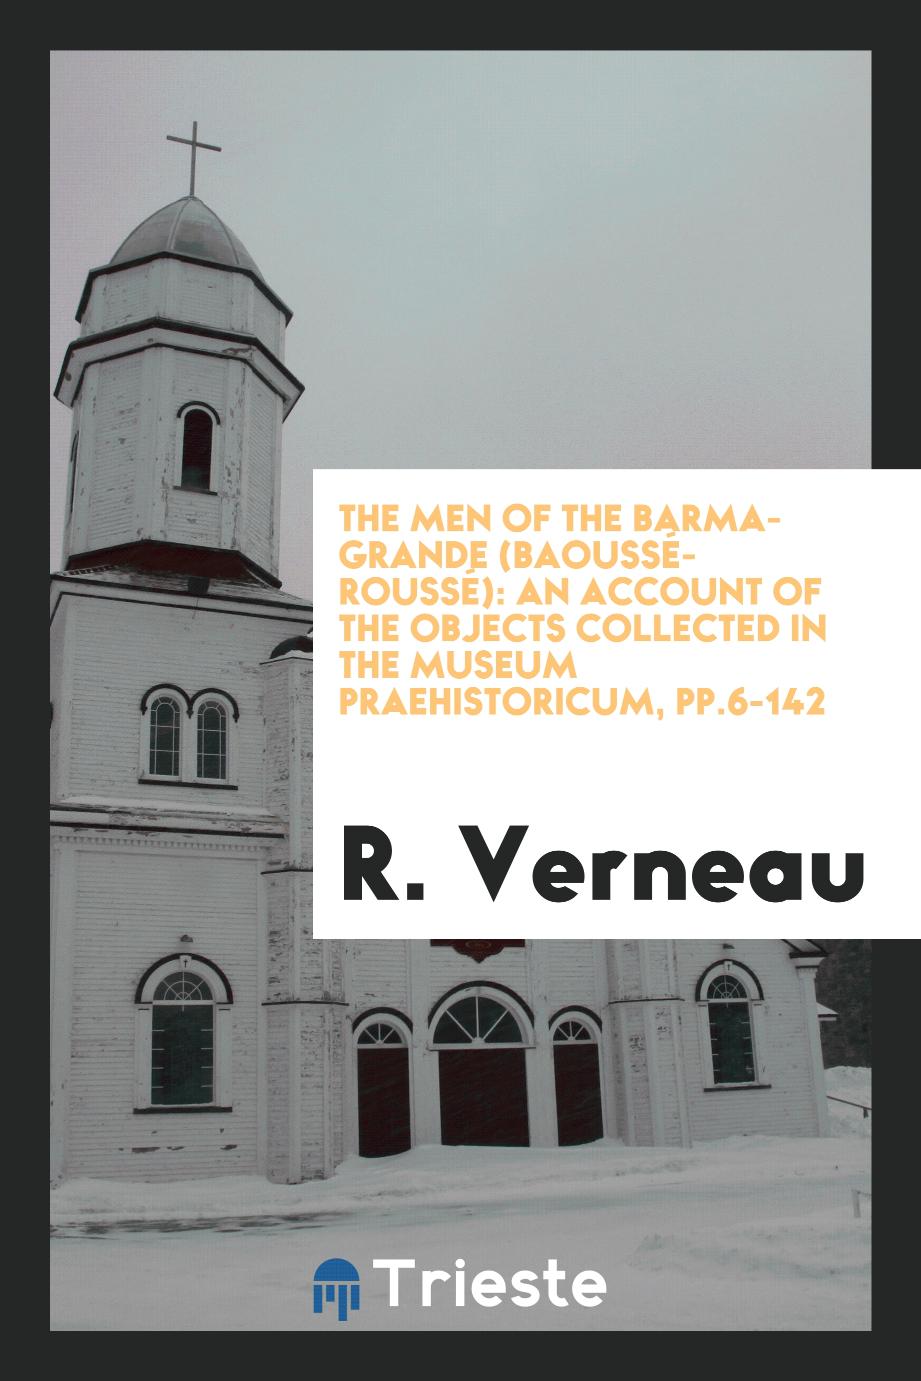 The Men of the Barma-Grande (Baoussé-Roussé): An Account of the Objects Collected in the Museum Praehistoricum, pp.6-142